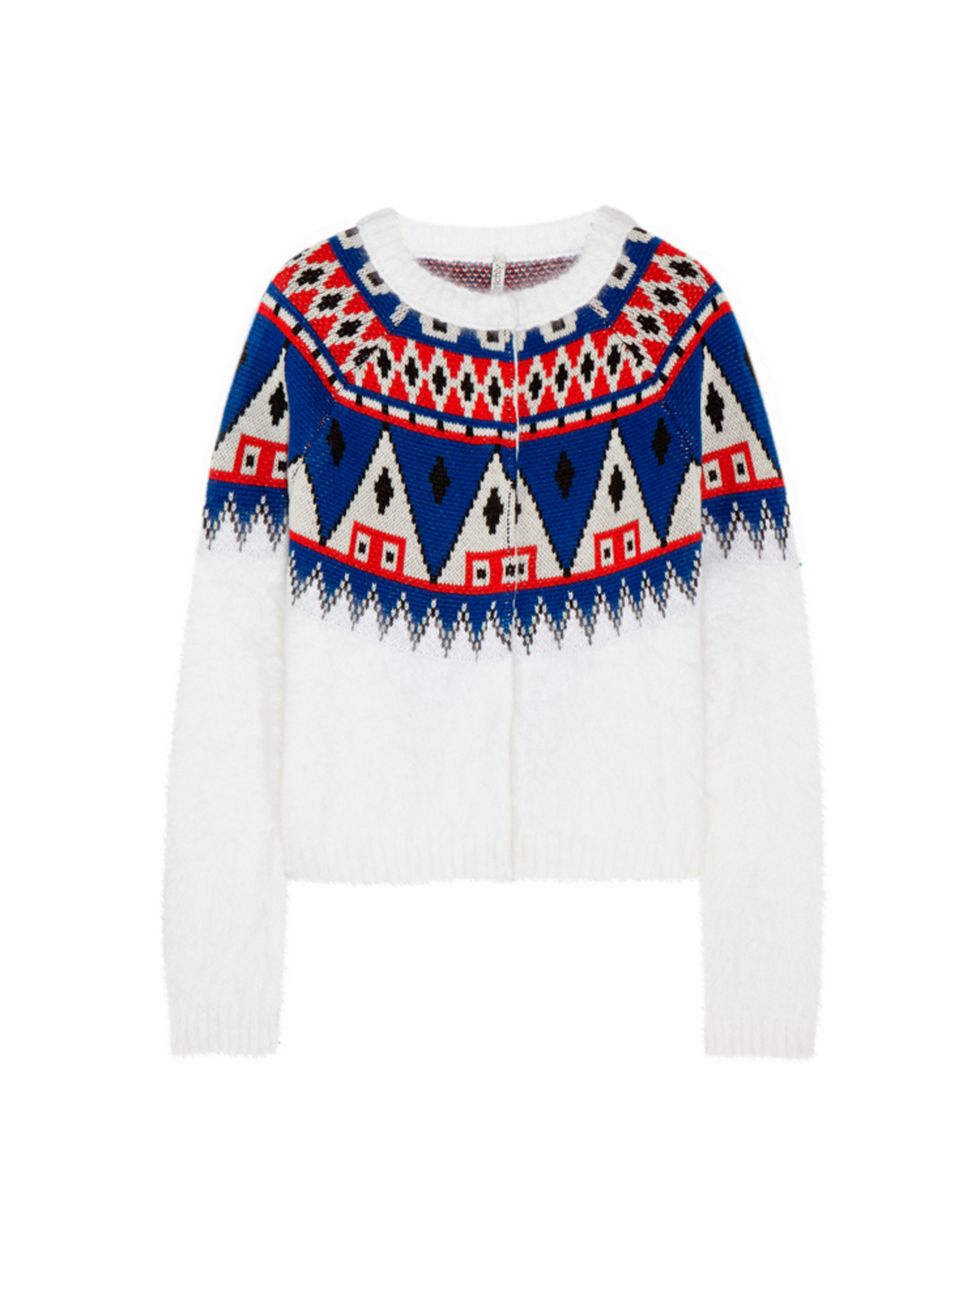 <p>Aimo Richly</p>

<p>Hand-loomed in Italy, Aimo Richly's intarsia knits will jazz up leather, denim and even the greyest winter days.</p>

<p>£470, by Aimo Richly from <a href="http://www.net-a-porter.com/product/477667/Finds/-aimo-richly-wool-and-angor